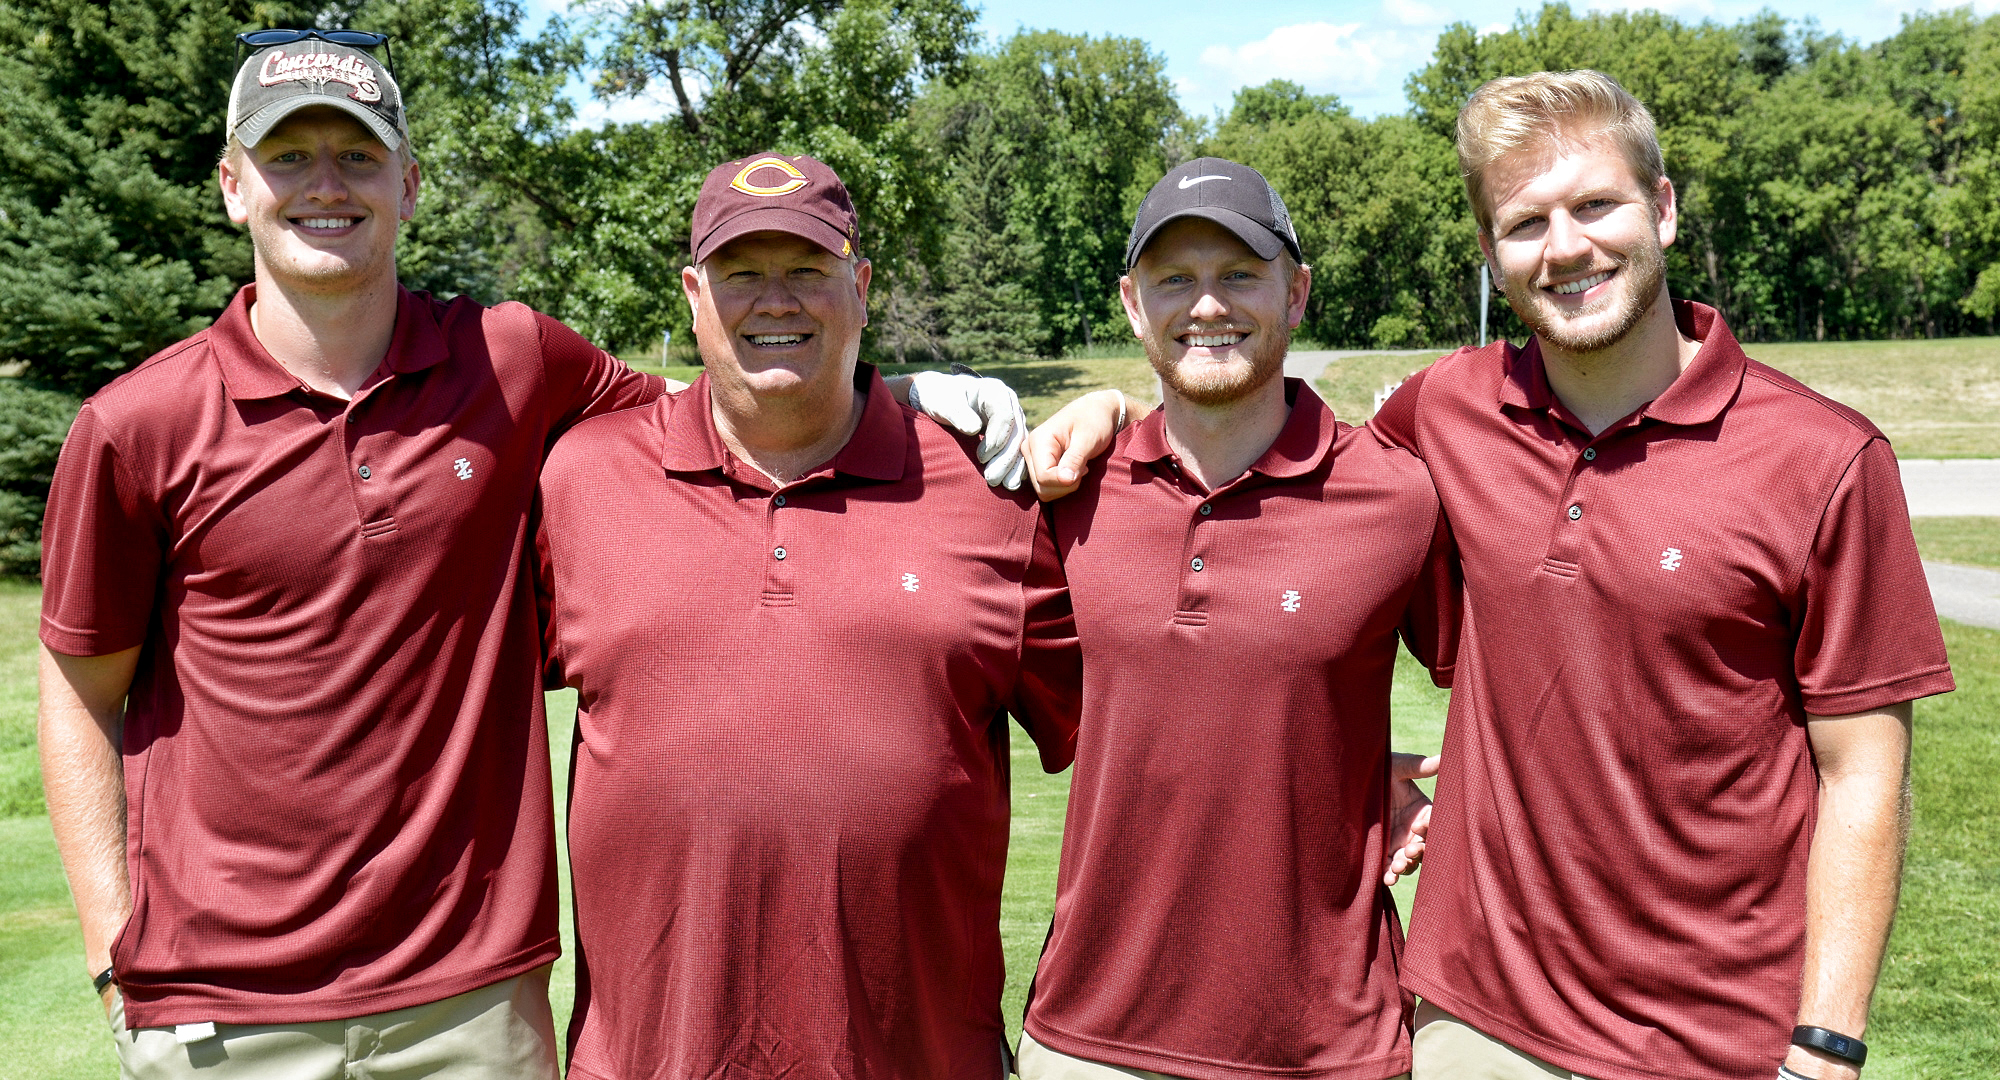 The Bye family have had two generations and four family members all play football at Concordia. (L-R: Matt, Rob, John, Erik)